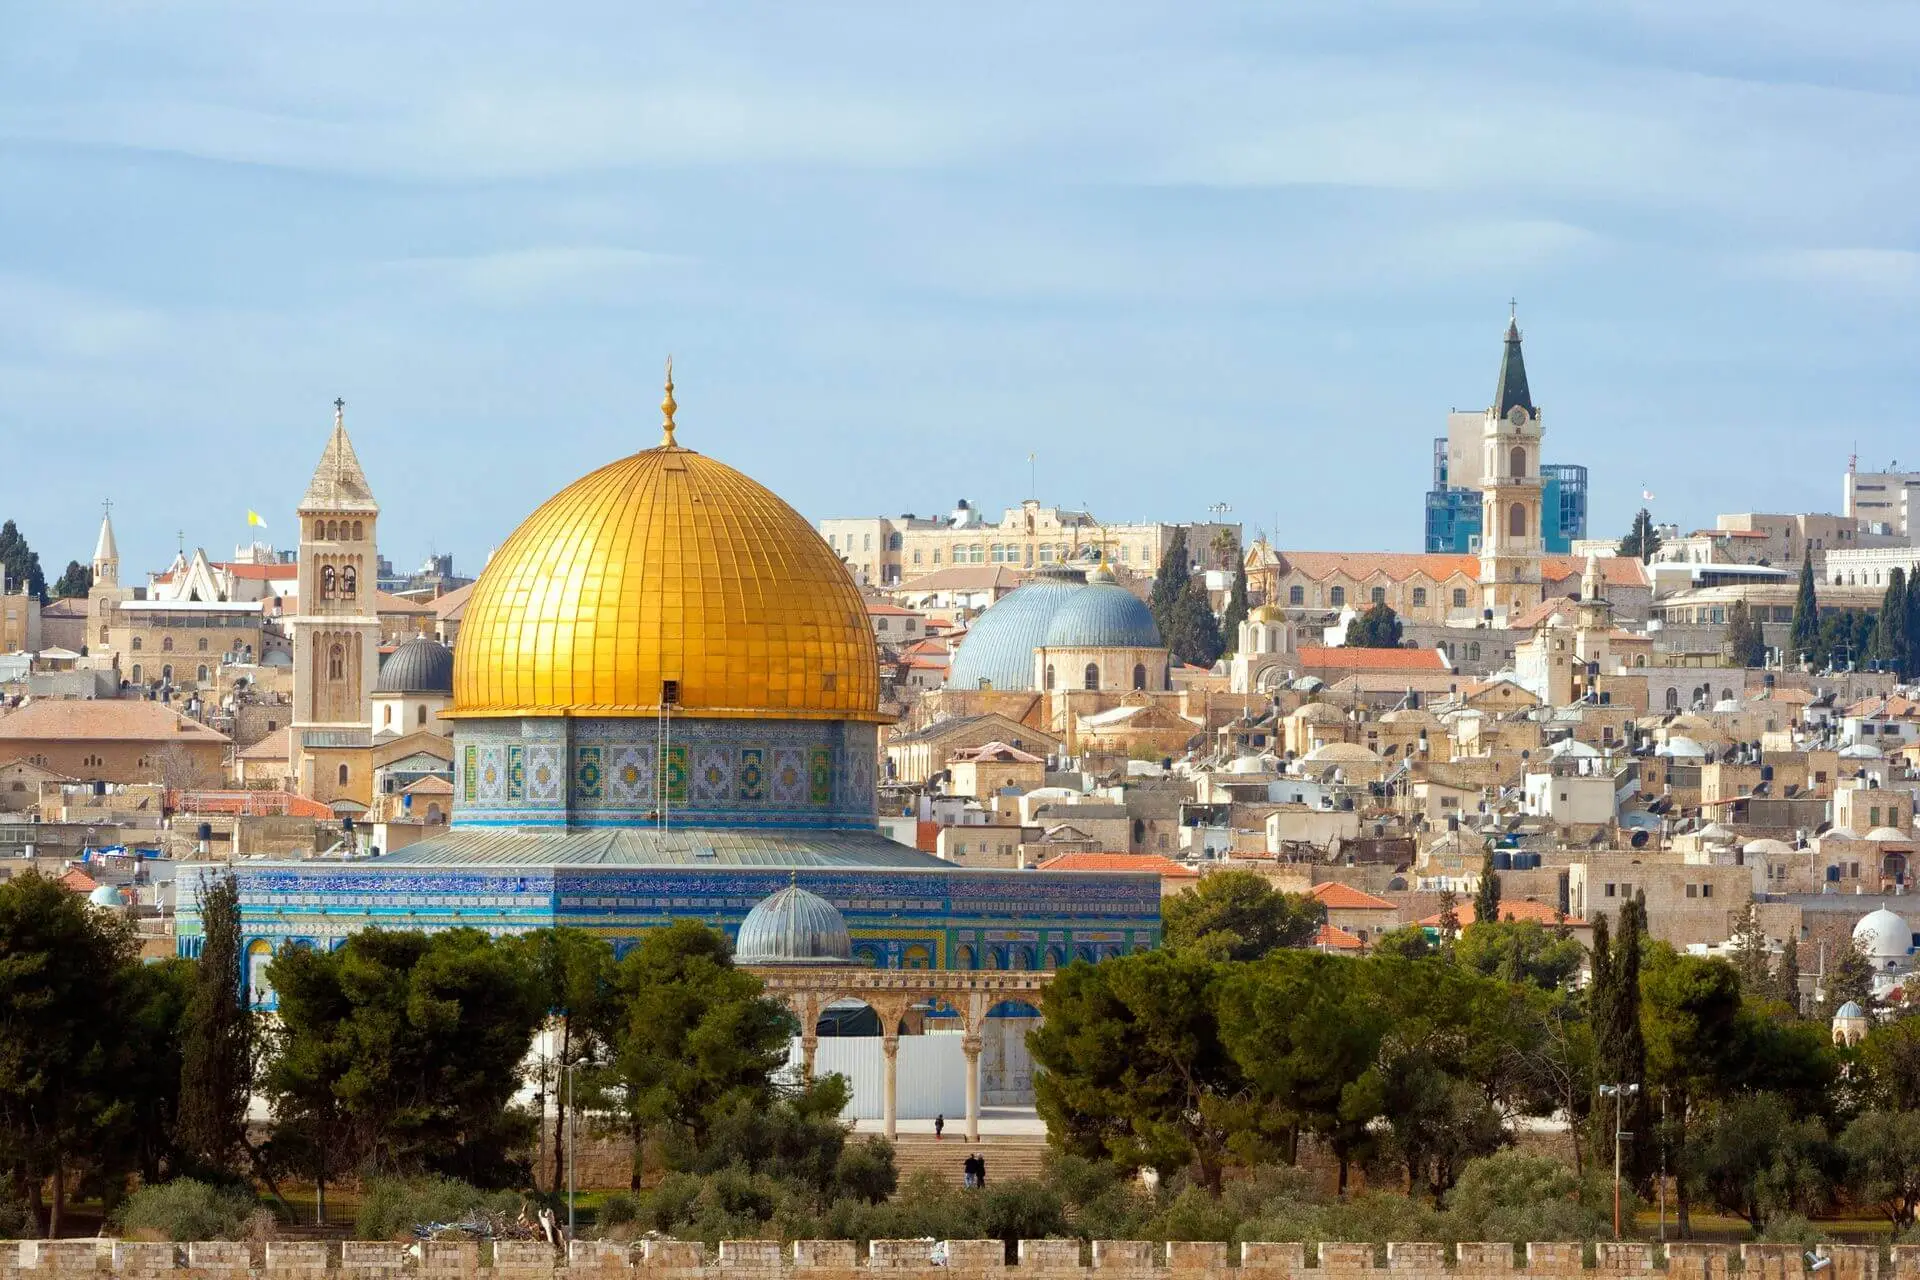 Israel - The Dome of the Rock on the temple mount in Jerusalem